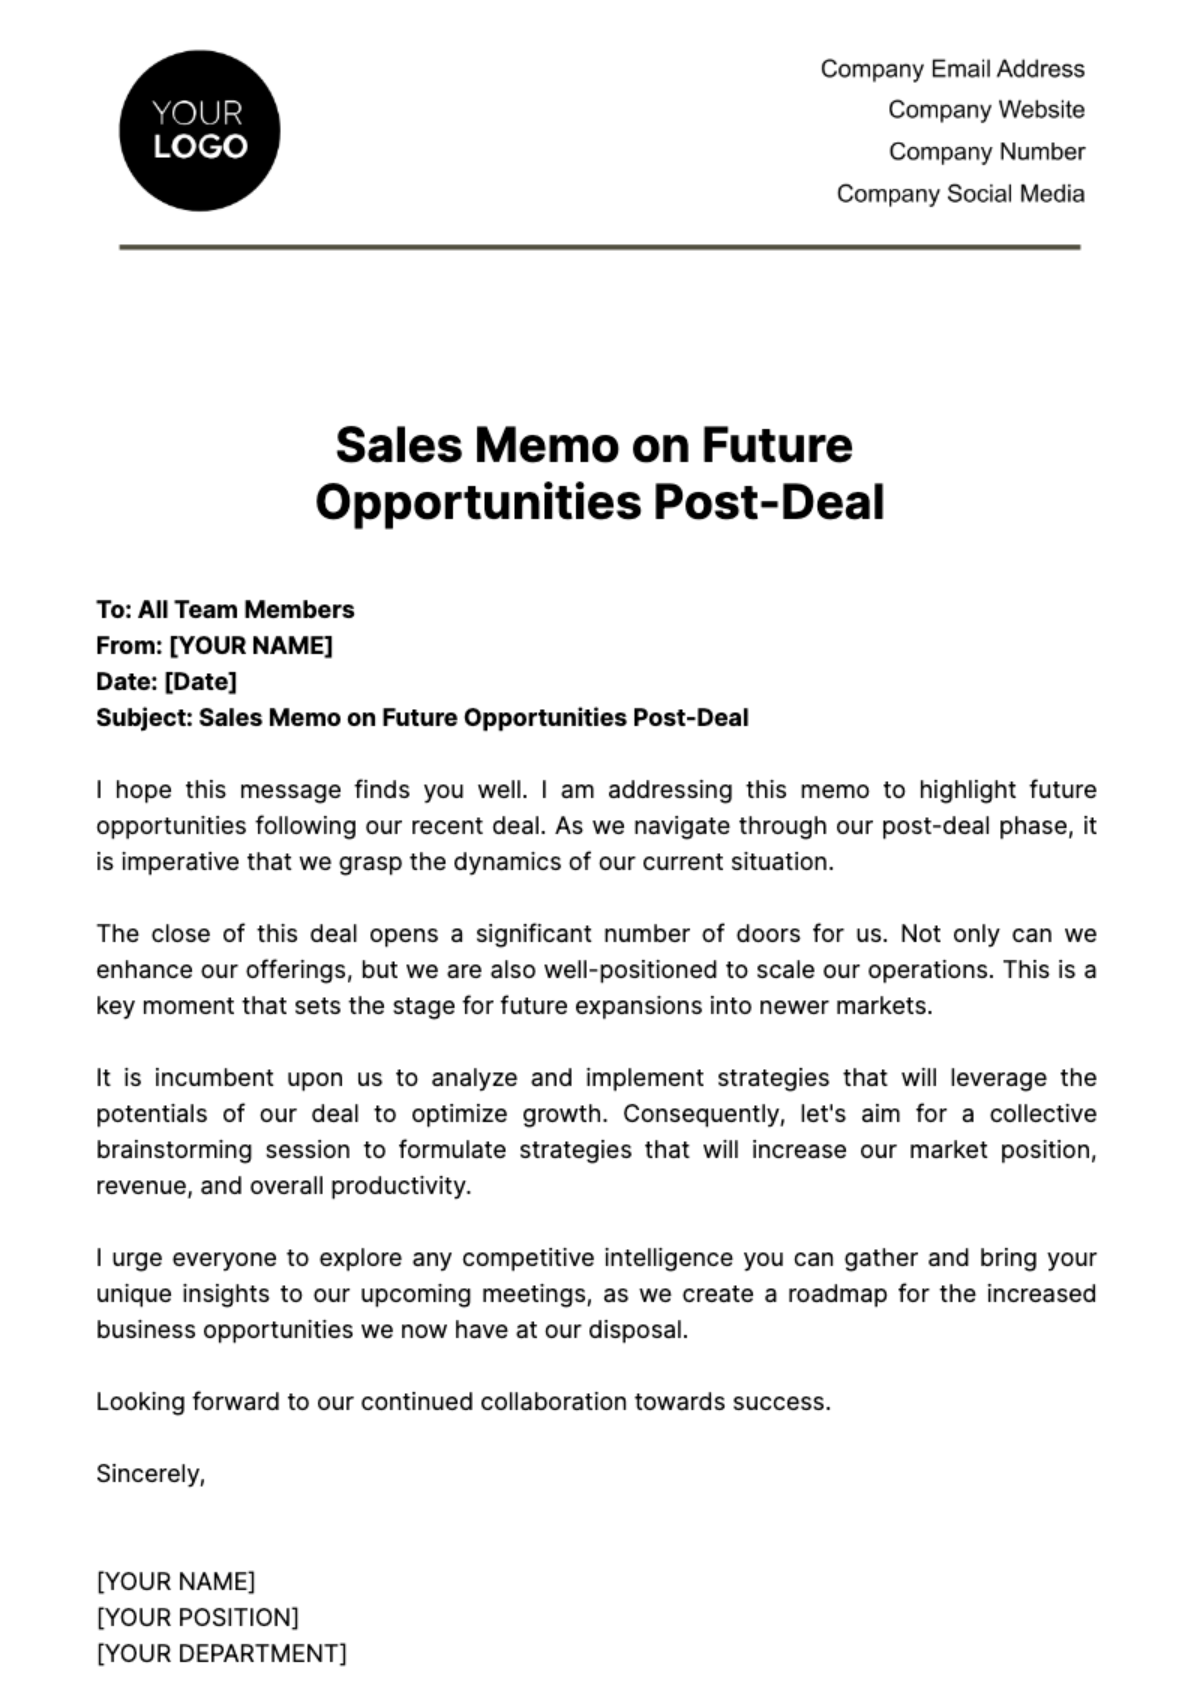 Sales Memo on Future Opportunities Post-Deal Template